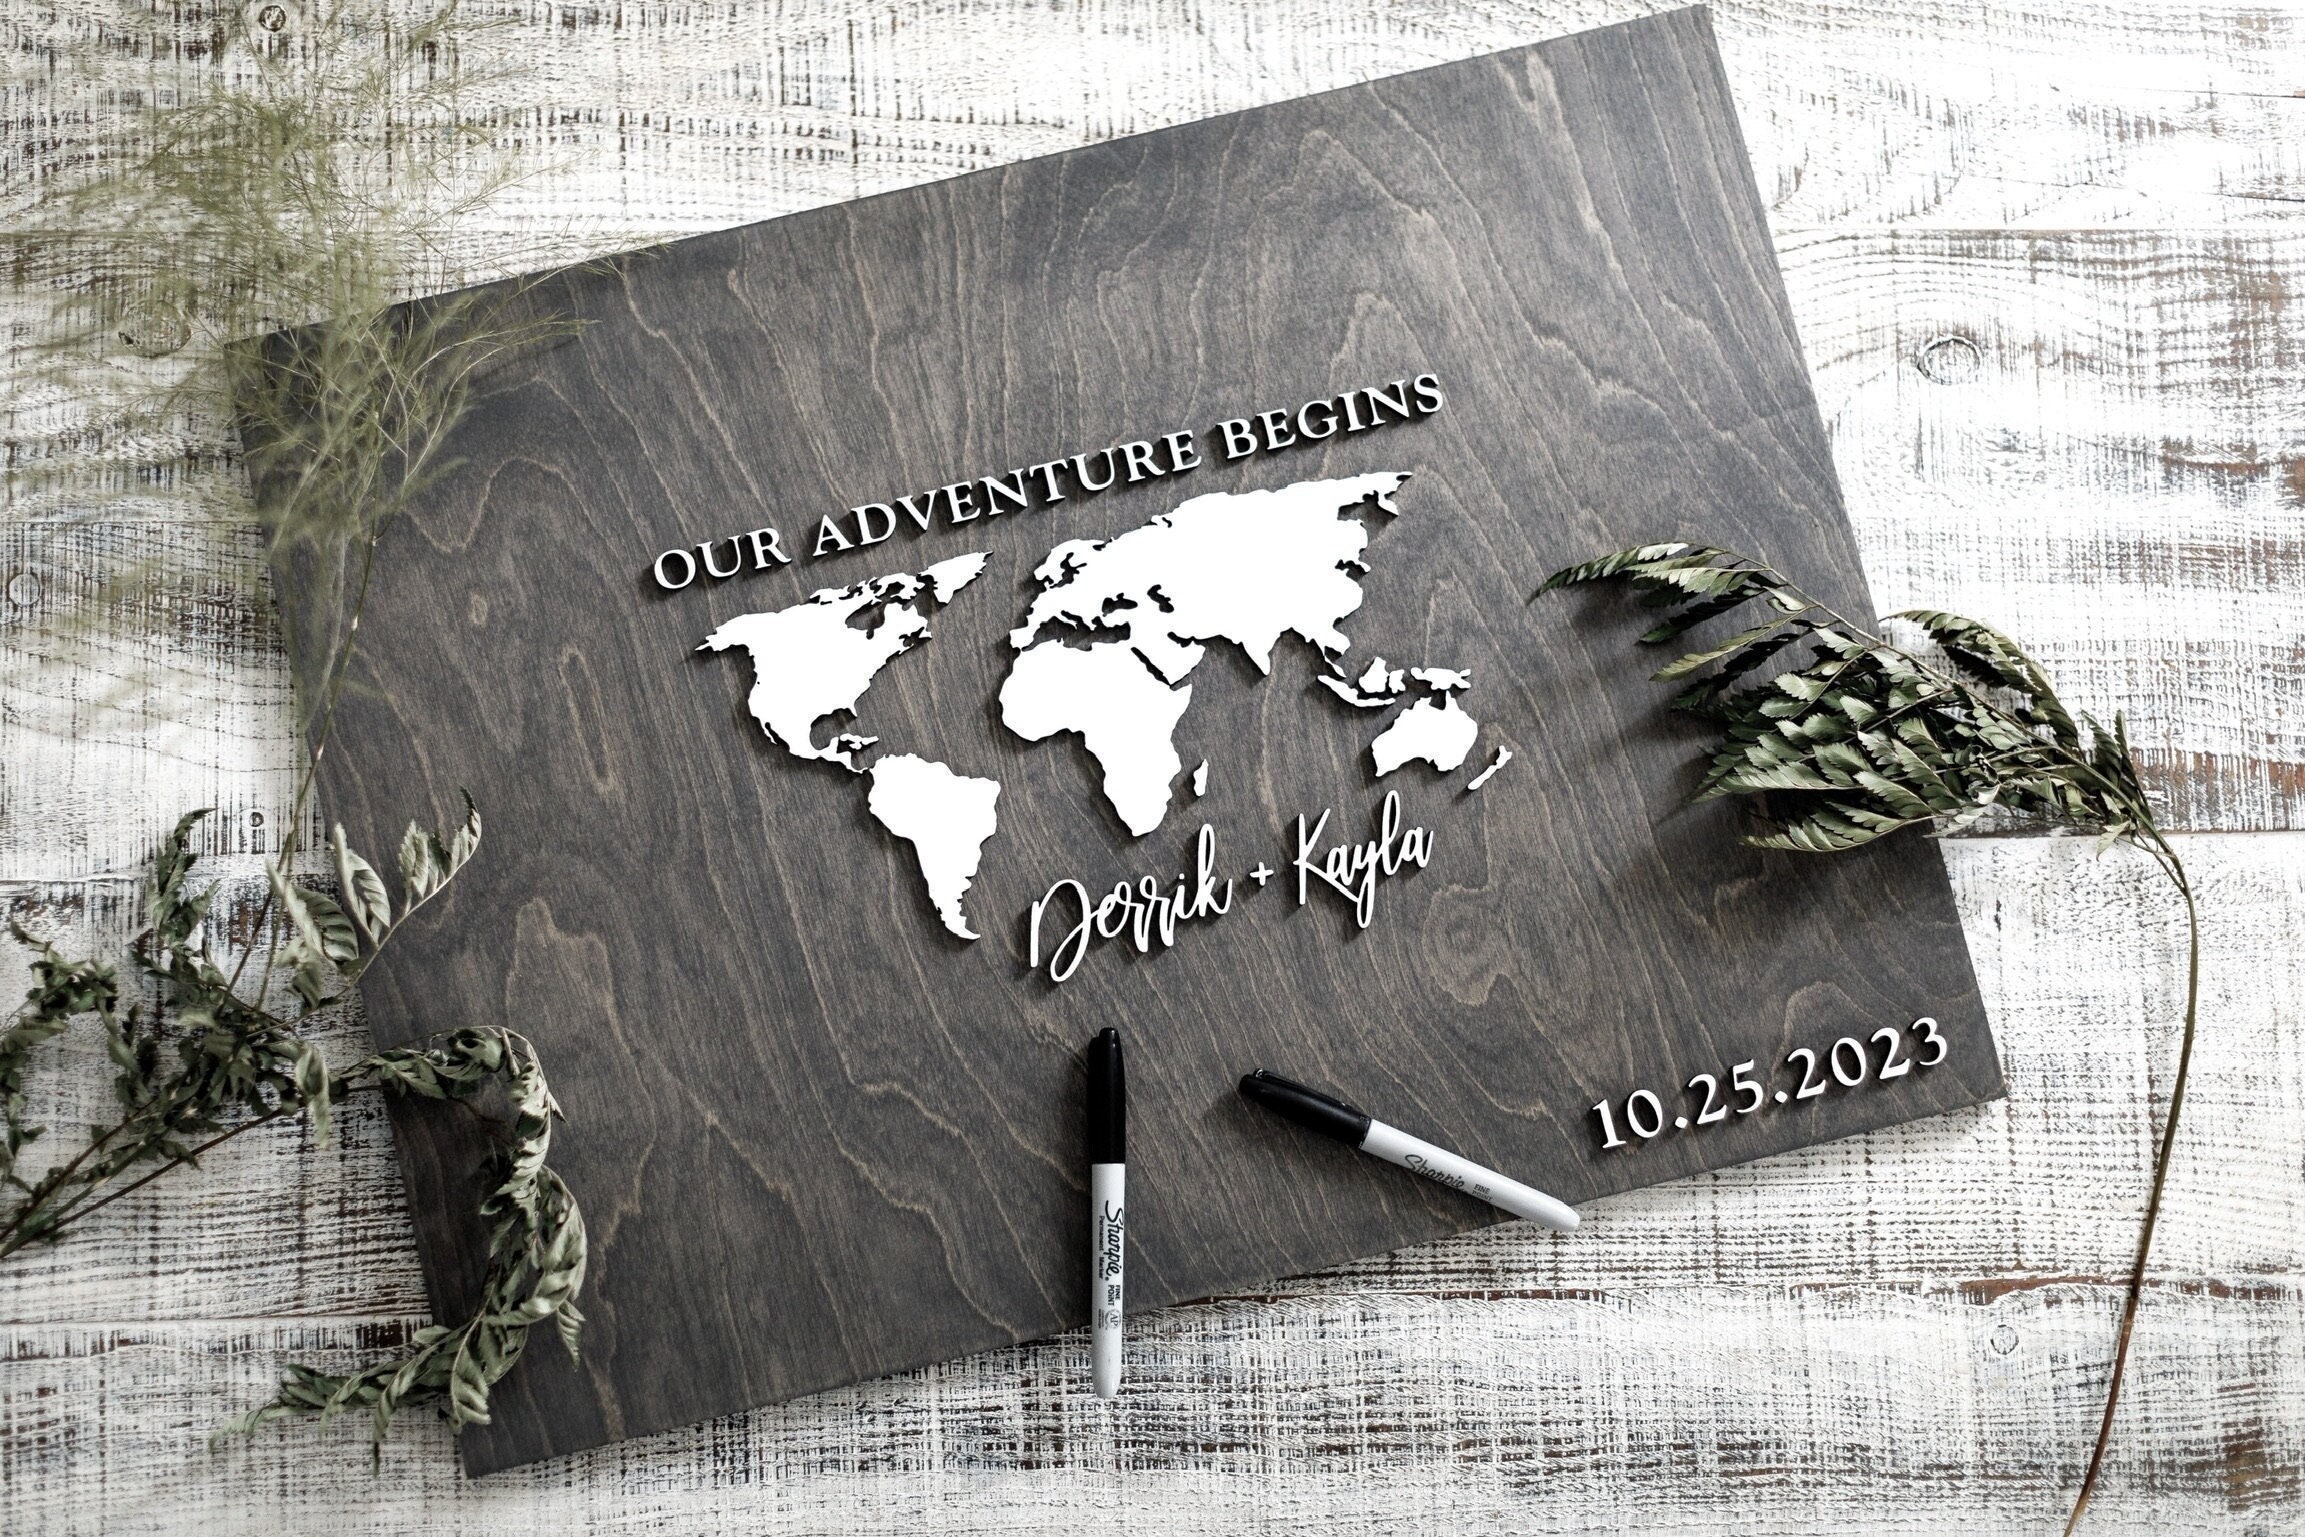 Personalized Adventure Book, Customized Travel Memory Book, Our